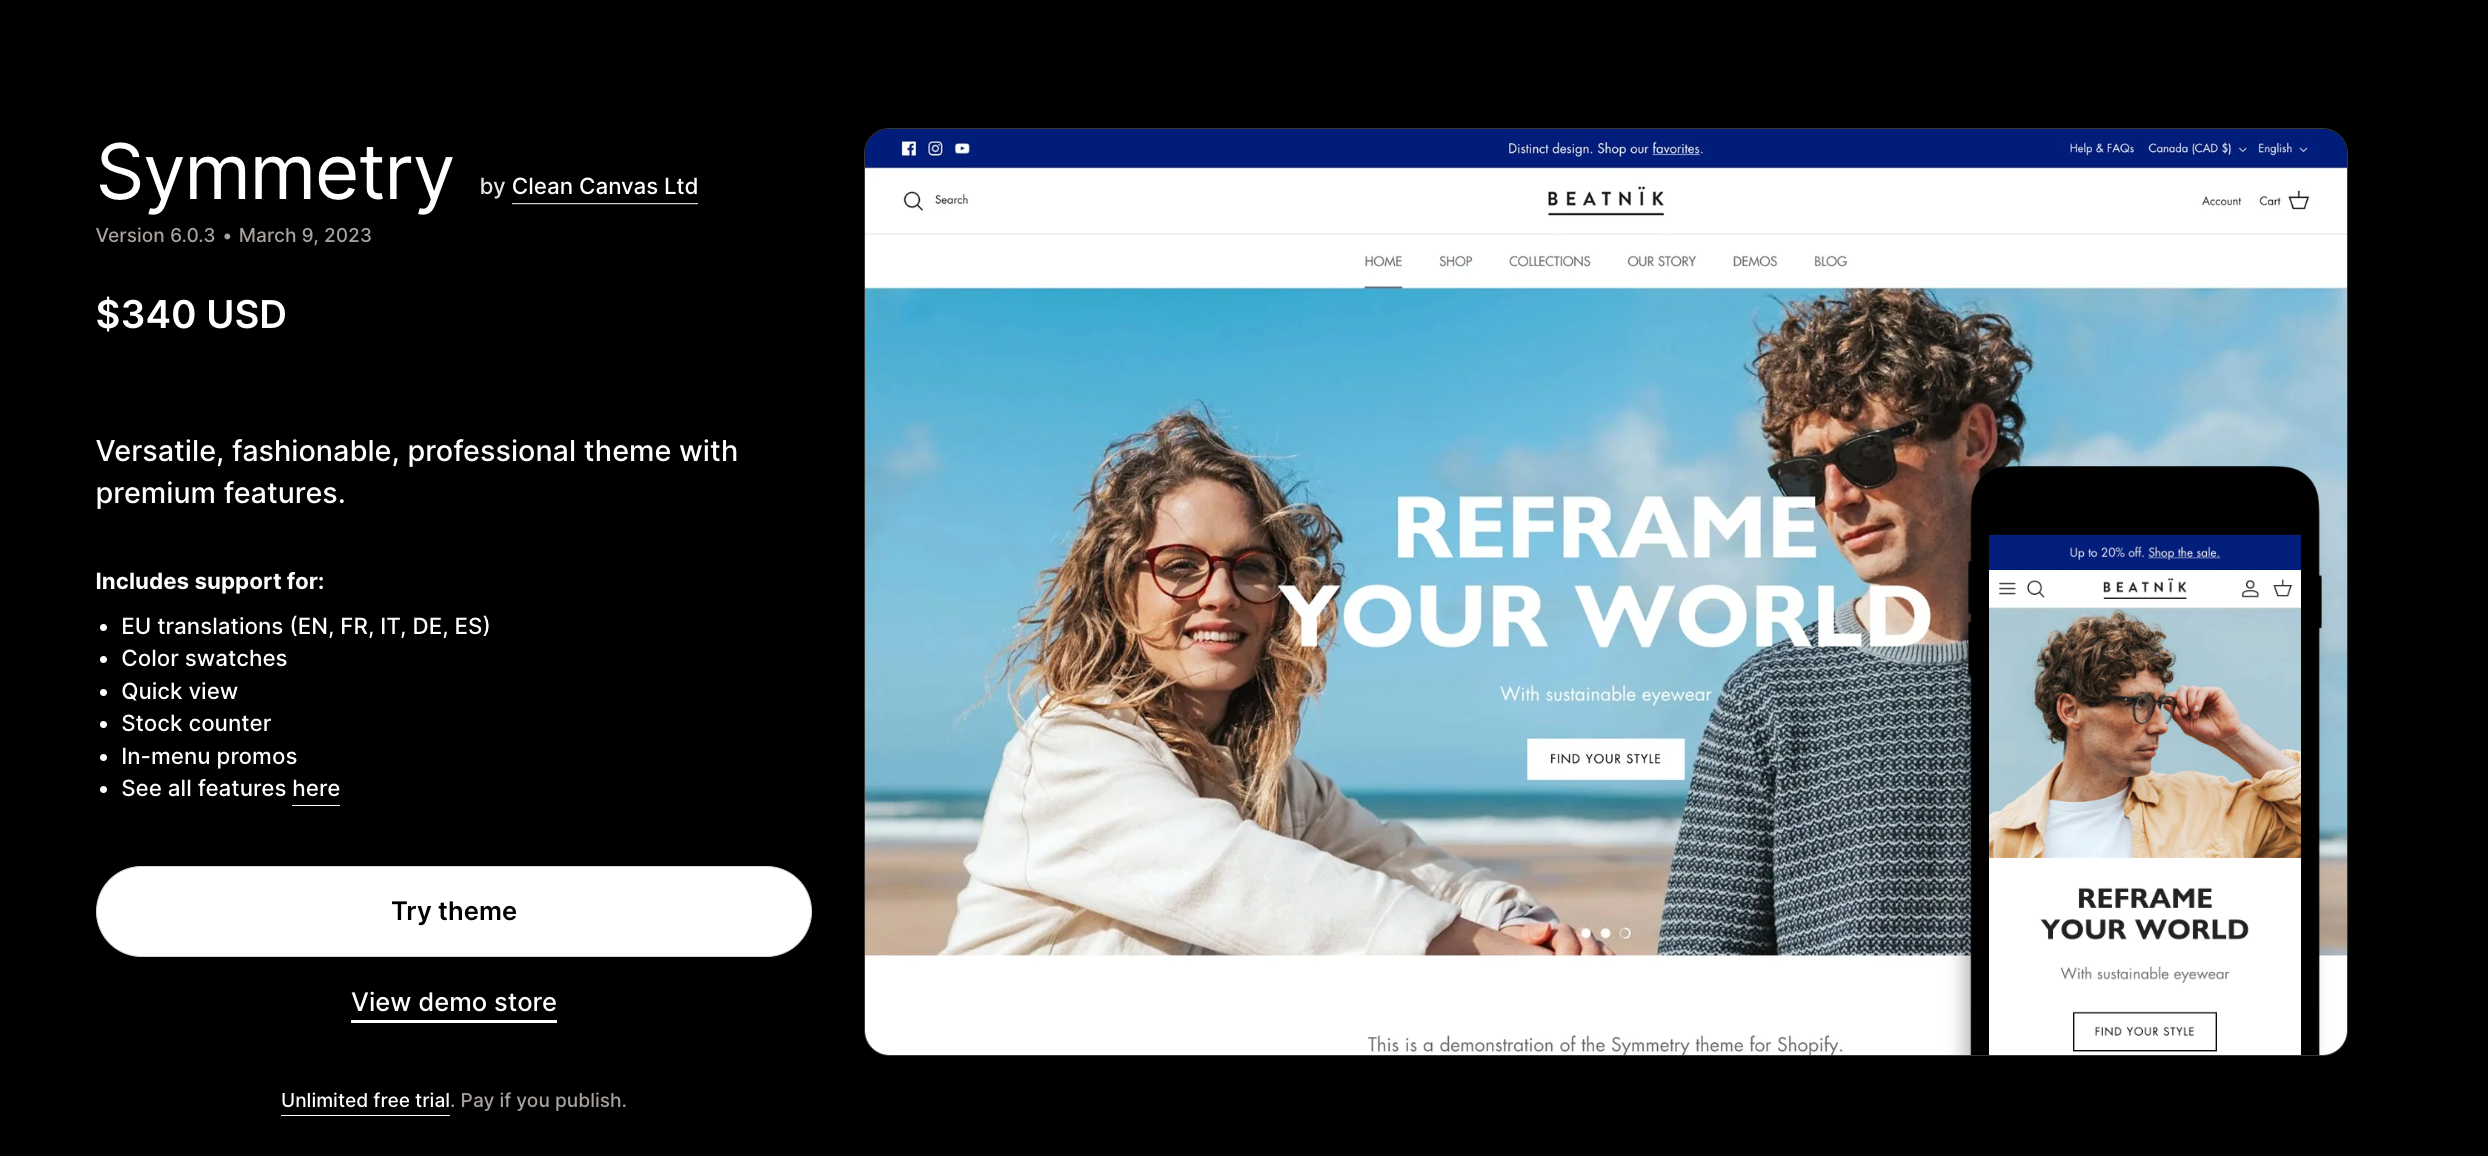 The Symmetry Shopify theme is designed for those seeking a minimalist Shopify clothing template